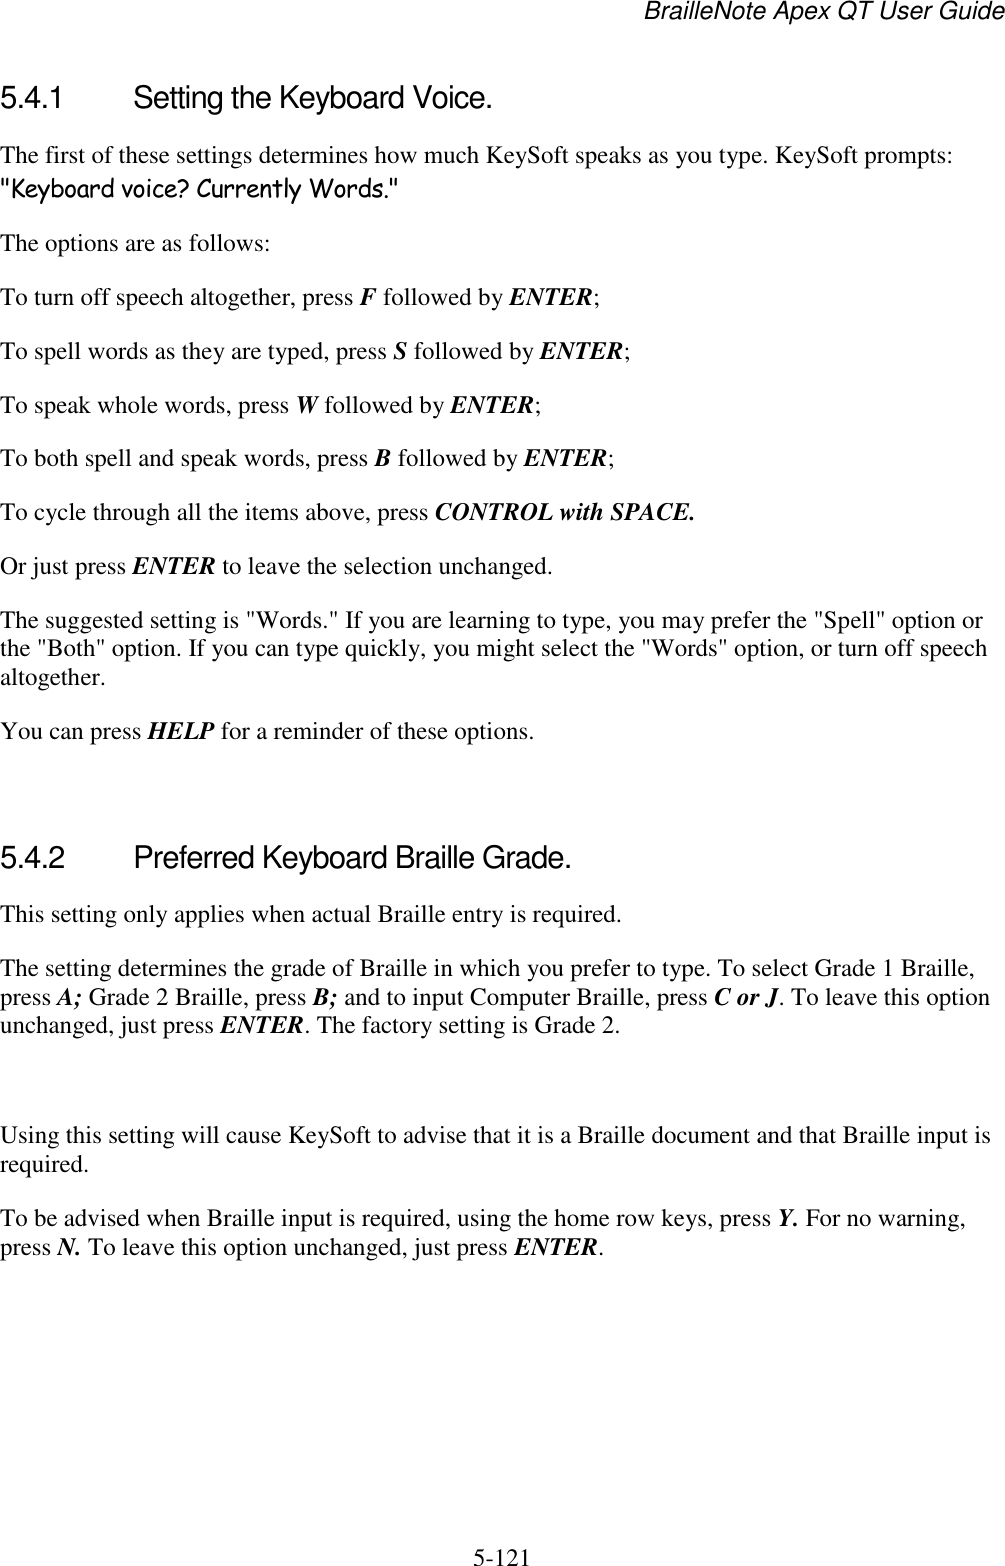 BrailleNote Apex QT User Guide  5-121   5.4.1  Setting the Keyboard Voice. The first of these settings determines how much KeySoft speaks as you type. KeySoft prompts: &quot;Keyboard voice? Currently Words.&quot; The options are as follows: To turn off speech altogether, press F followed by ENTER; To spell words as they are typed, press S followed by ENTER; To speak whole words, press W followed by ENTER; To both spell and speak words, press B followed by ENTER; To cycle through all the items above, press CONTROL with SPACE. Or just press ENTER to leave the selection unchanged. The suggested setting is &quot;Words.&quot; If you are learning to type, you may prefer the &quot;Spell&quot; option or the &quot;Both&quot; option. If you can type quickly, you might select the &quot;Words&quot; option, or turn off speech altogether. You can press HELP for a reminder of these options.   5.4.2  Preferred Keyboard Braille Grade. This setting only applies when actual Braille entry is required. The setting determines the grade of Braille in which you prefer to type. To select Grade 1 Braille, press A; Grade 2 Braille, press B; and to input Computer Braille, press C or J. To leave this option unchanged, just press ENTER. The factory setting is Grade 2.   Using this setting will cause KeySoft to advise that it is a Braille document and that Braille input is required. To be advised when Braille input is required, using the home row keys, press Y. For no warning, press N. To leave this option unchanged, just press ENTER.   